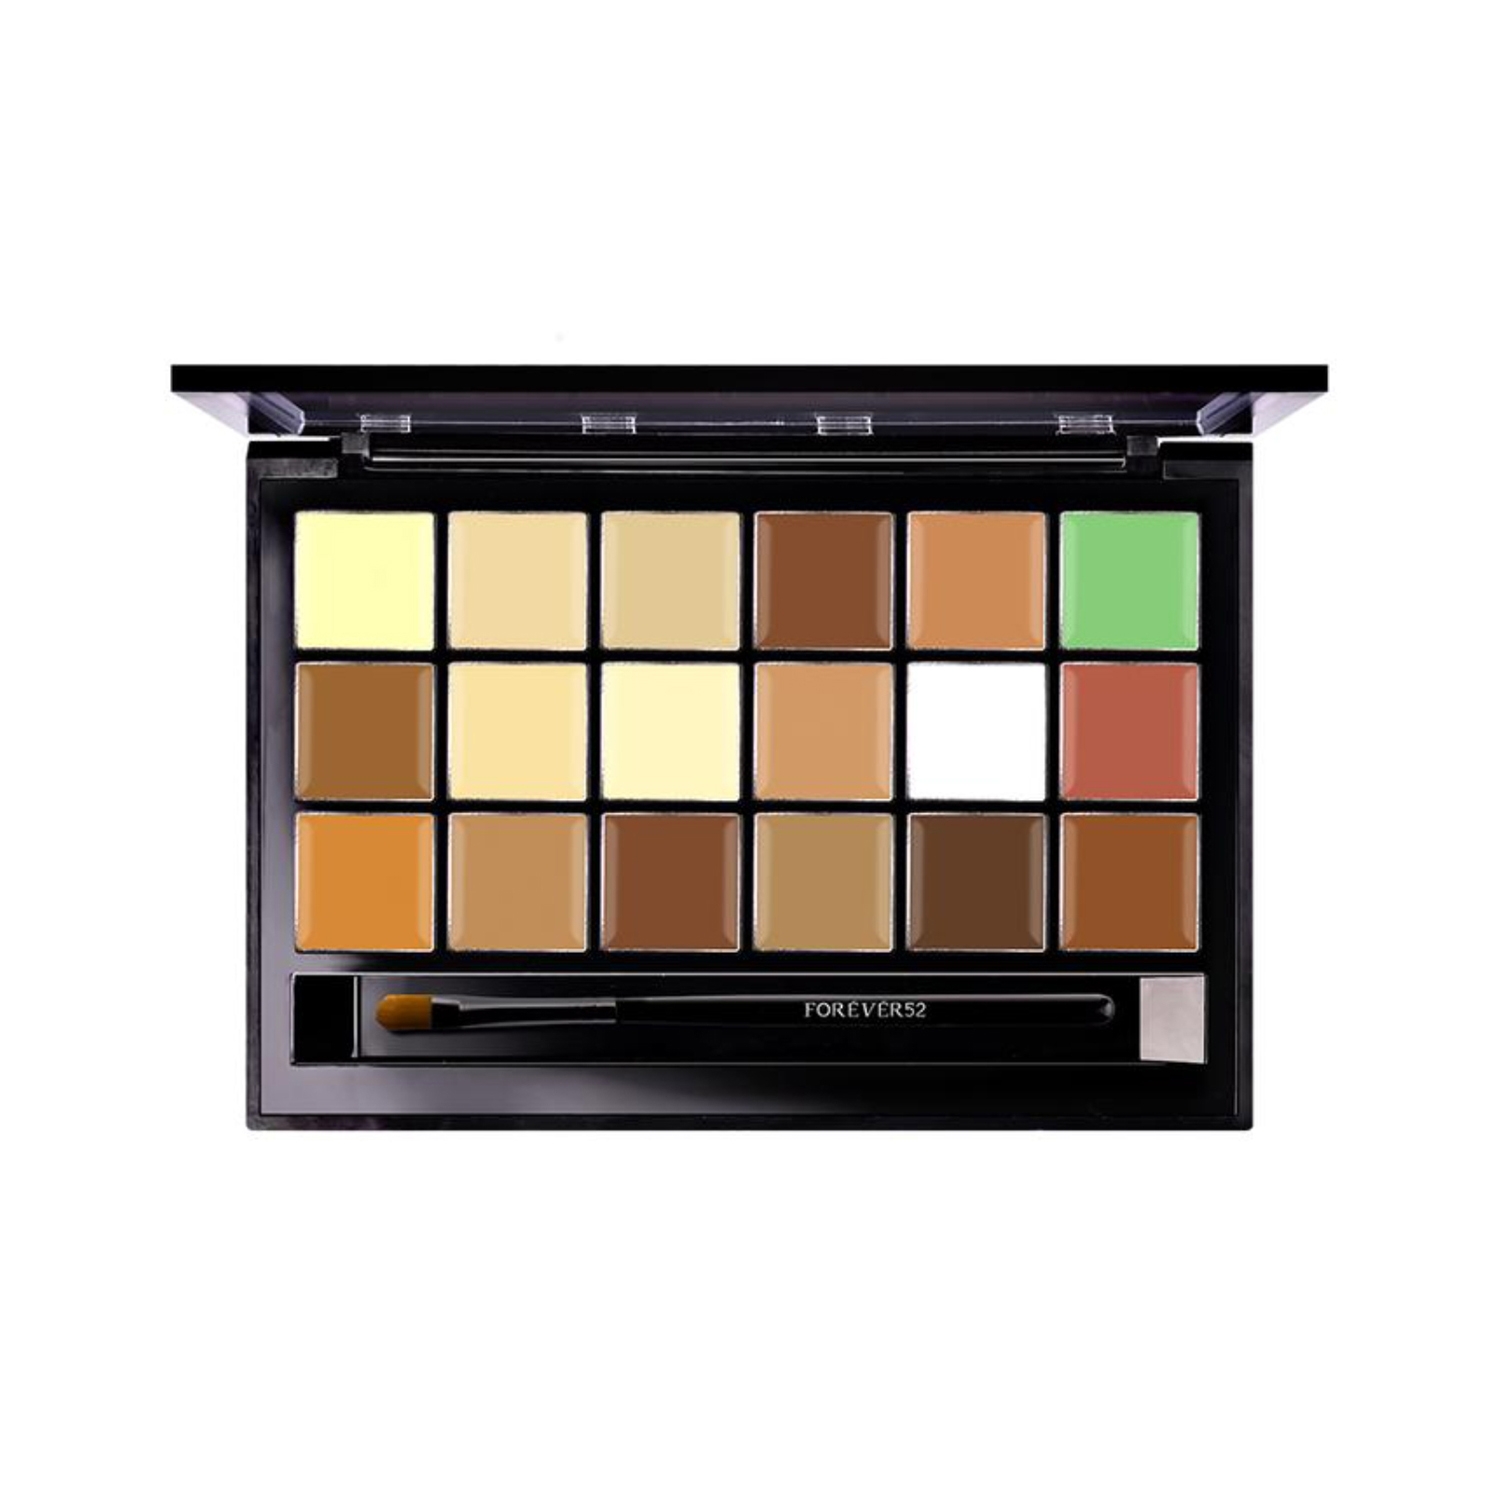 Daily Life Forever52 Multitasker Corrector Palette MPC001 (36gm)